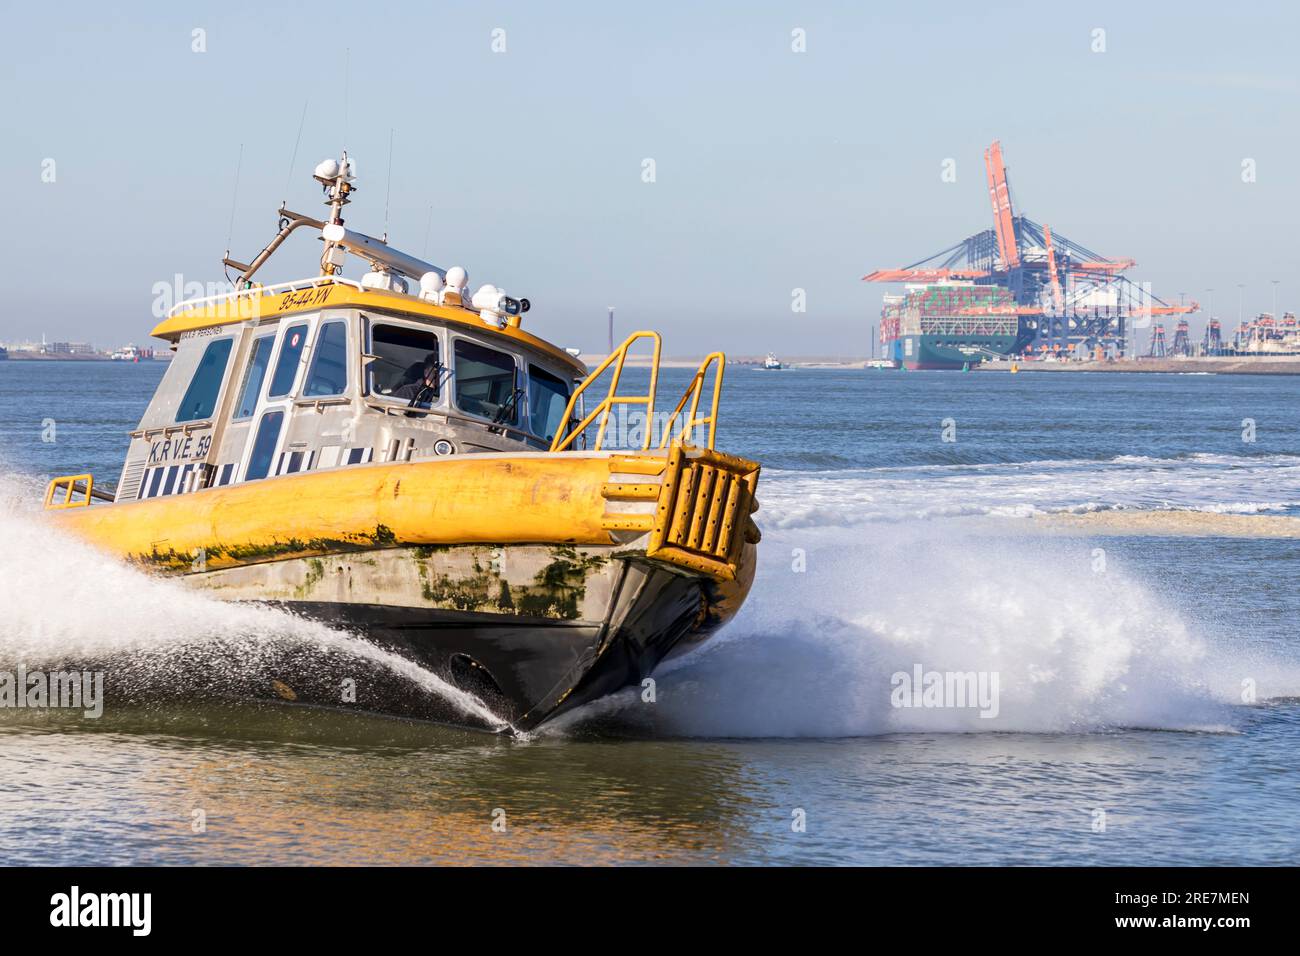 Rotterdam, the Netherlands - 2022-02-26: A small vessel of KRVE boatsmen service in the port of Rotterdam at high speed Stock Photo